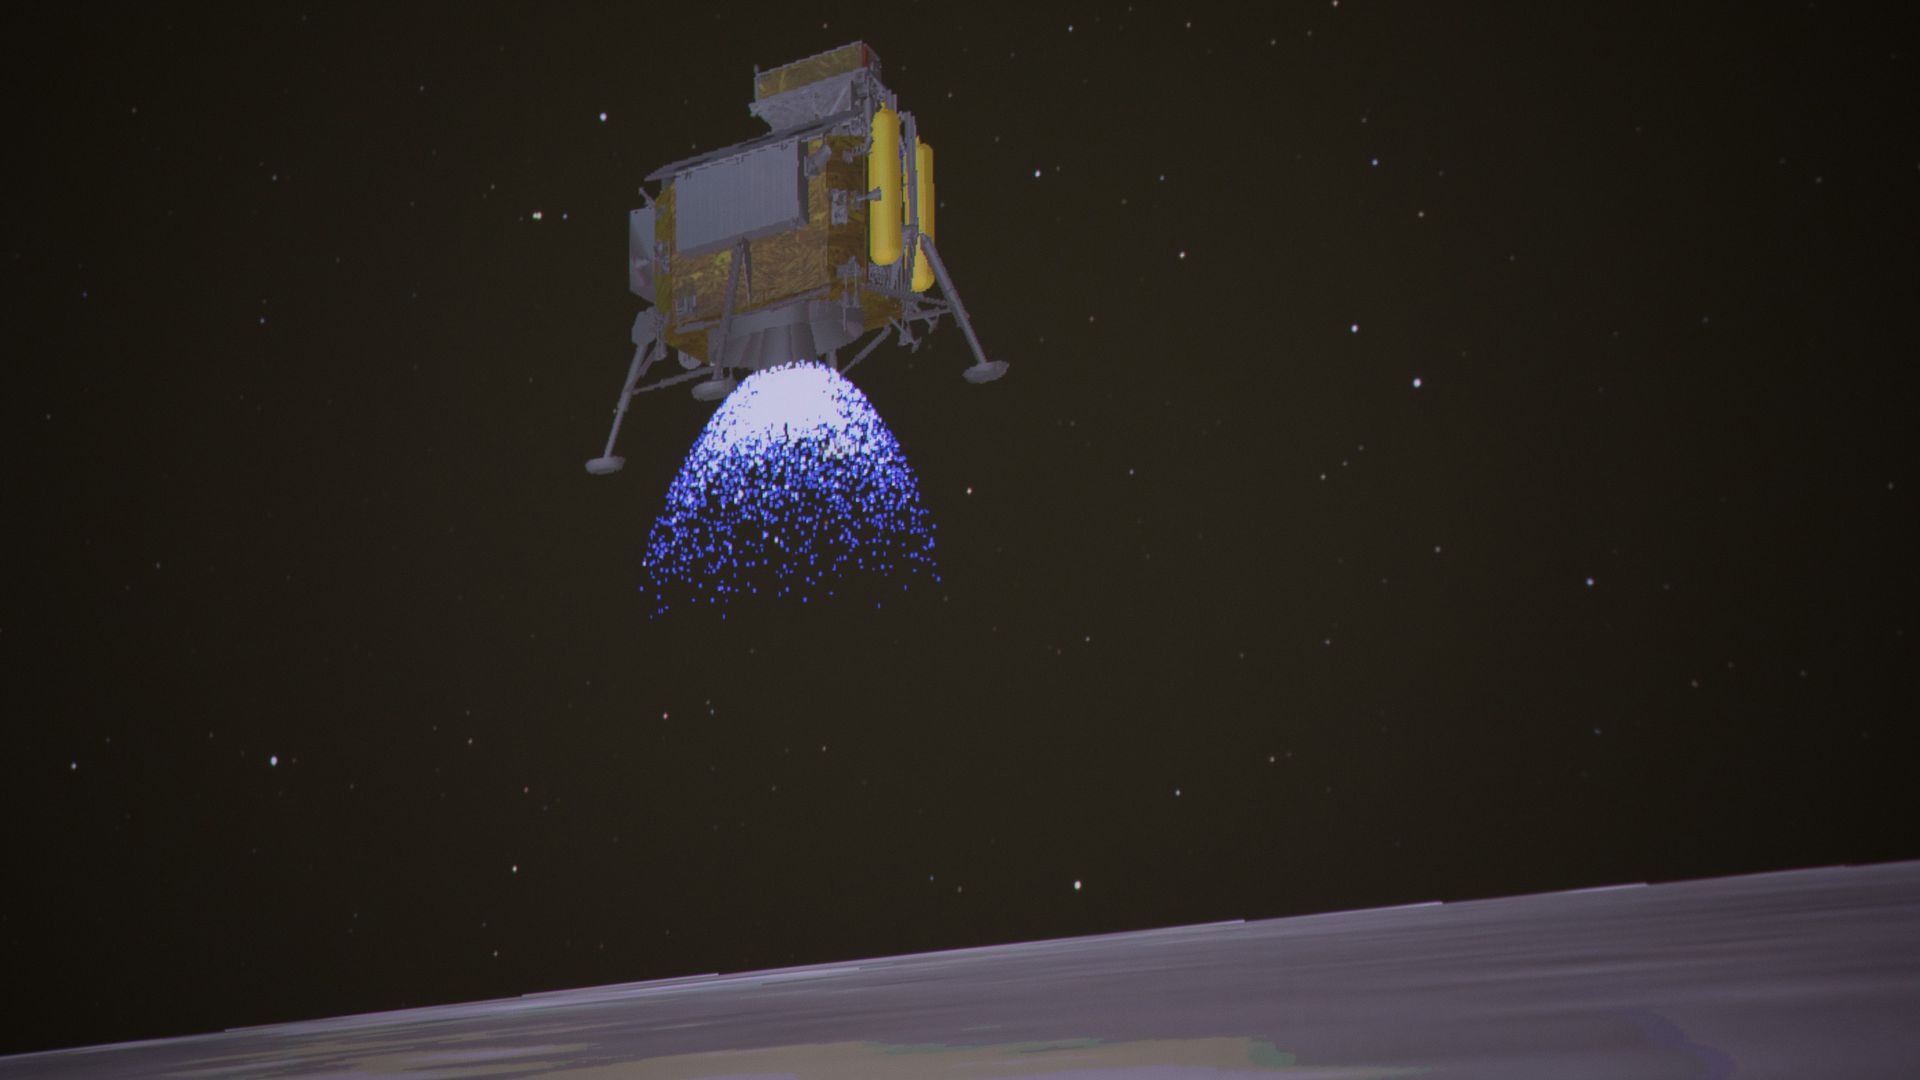 A simulated landing of China's vessel landing on the moon